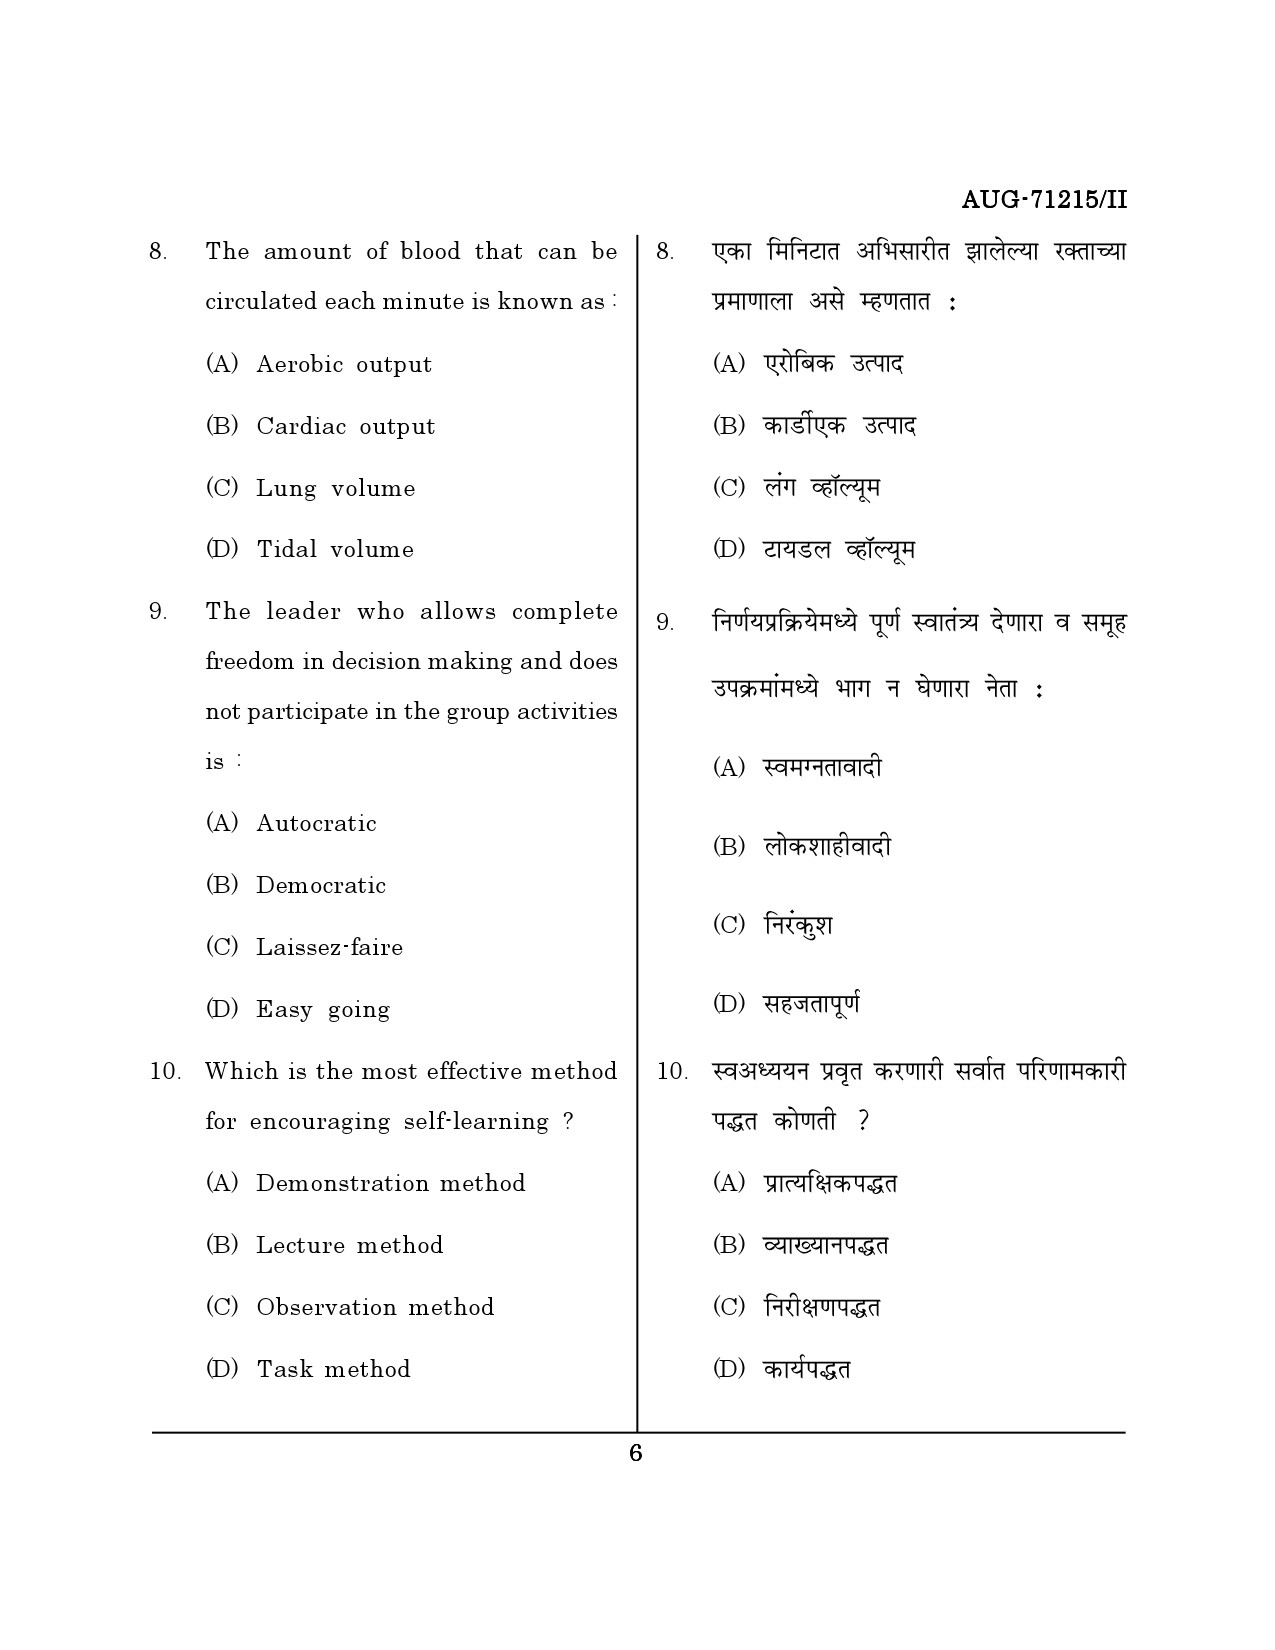 Maharashtra SET Physical Education Question Paper II August 2015 5